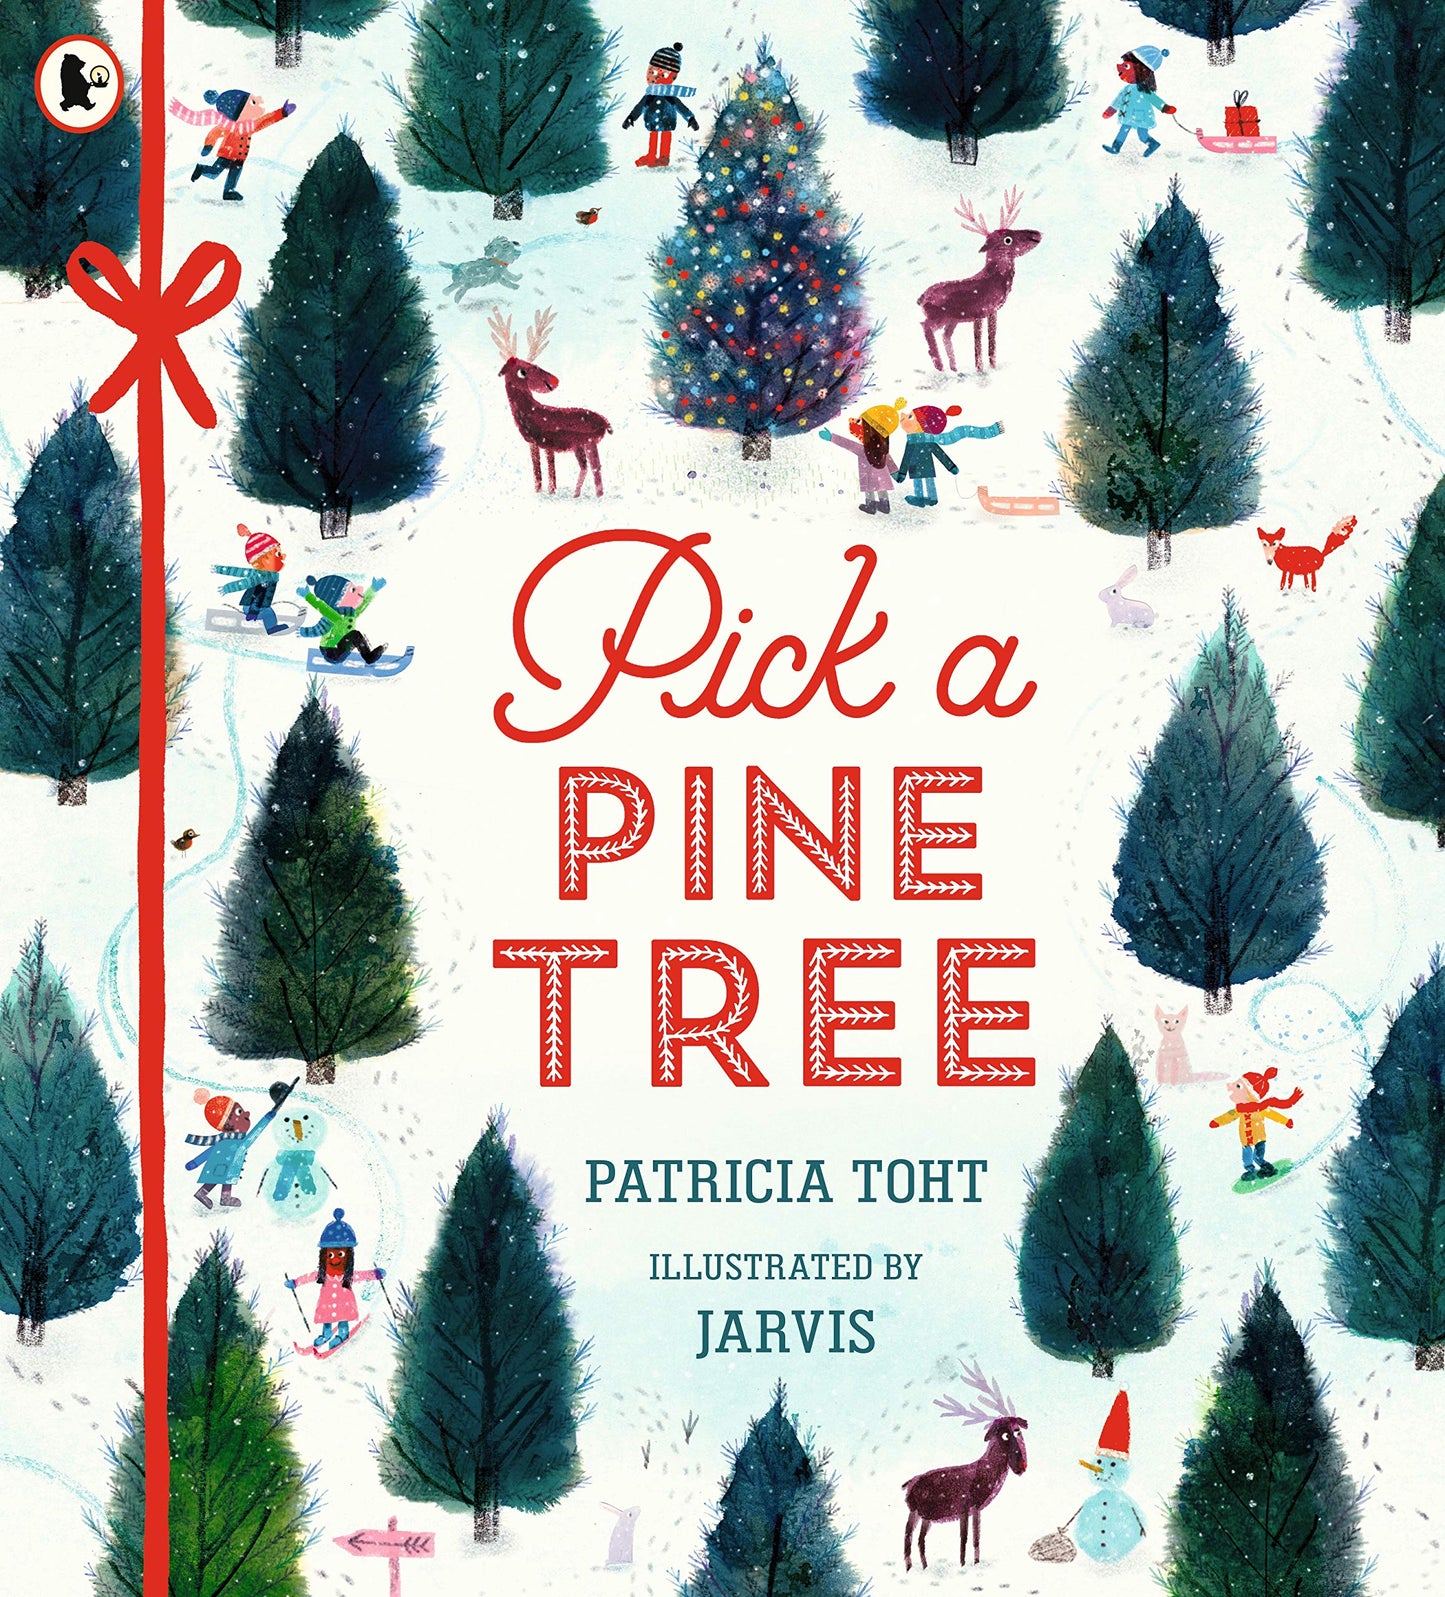 Pick a Pine Tree by Patricia Toht & Jarvis